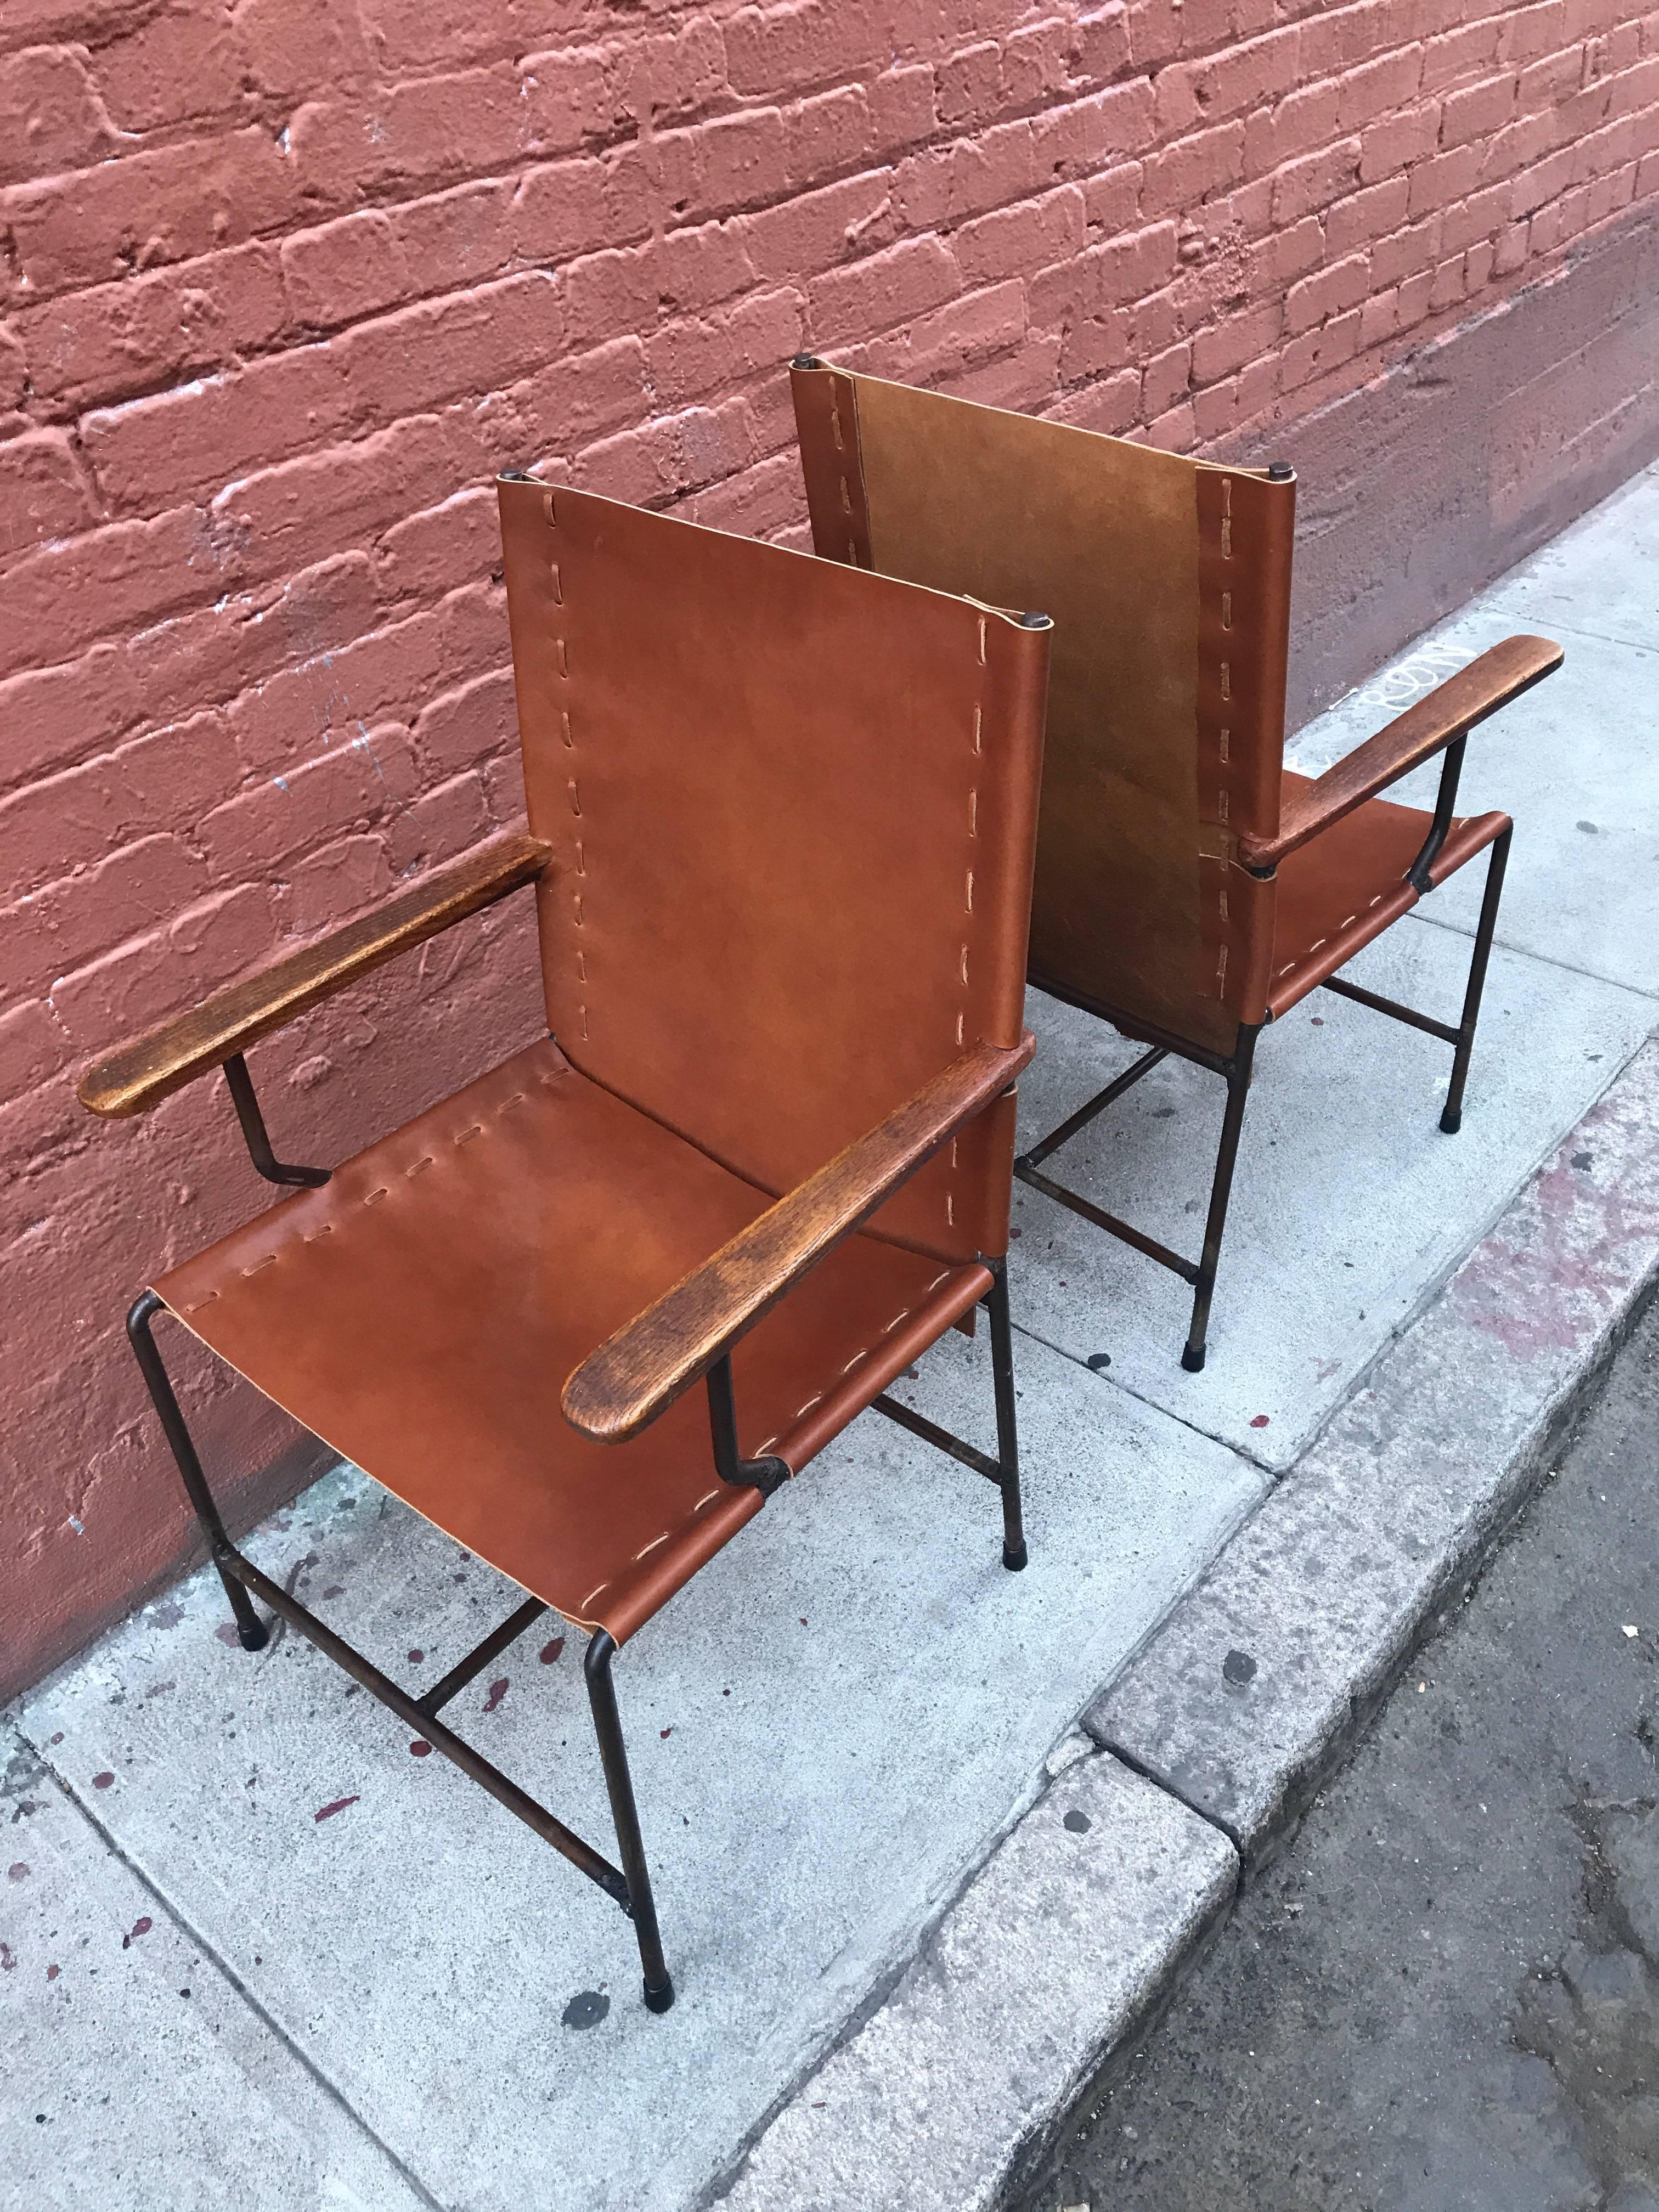 Pair of Mexican Modern Armchairs in Iron and Leather, circa 1950s For Sale 3